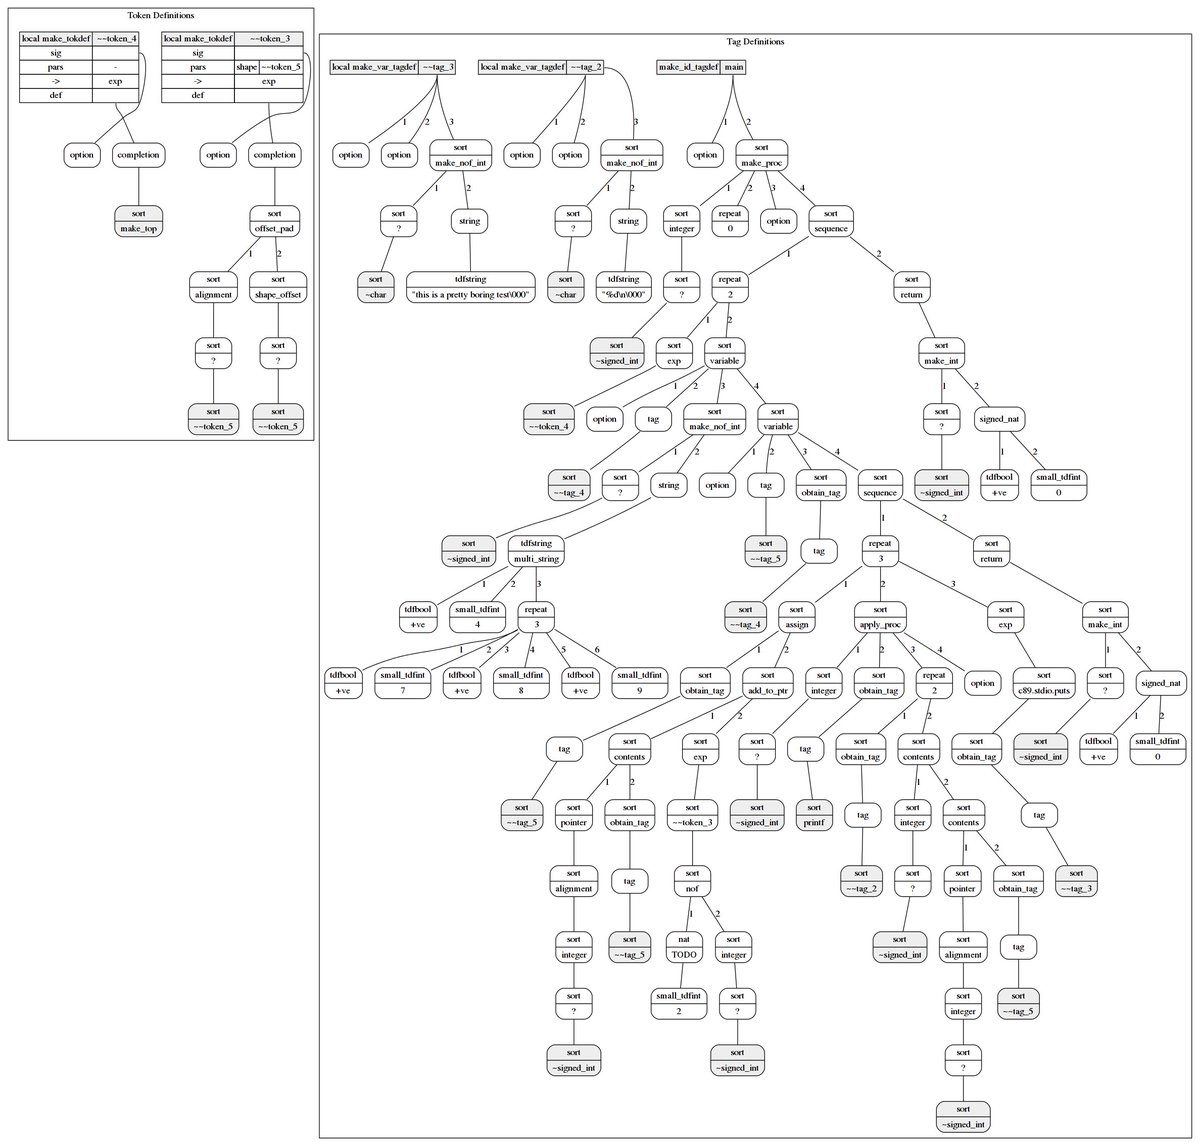 Here's another tree from a different program. This one's an IR from a C and C++ compiler.Unless you're debugging this part itself, the implementation detail is just noise.